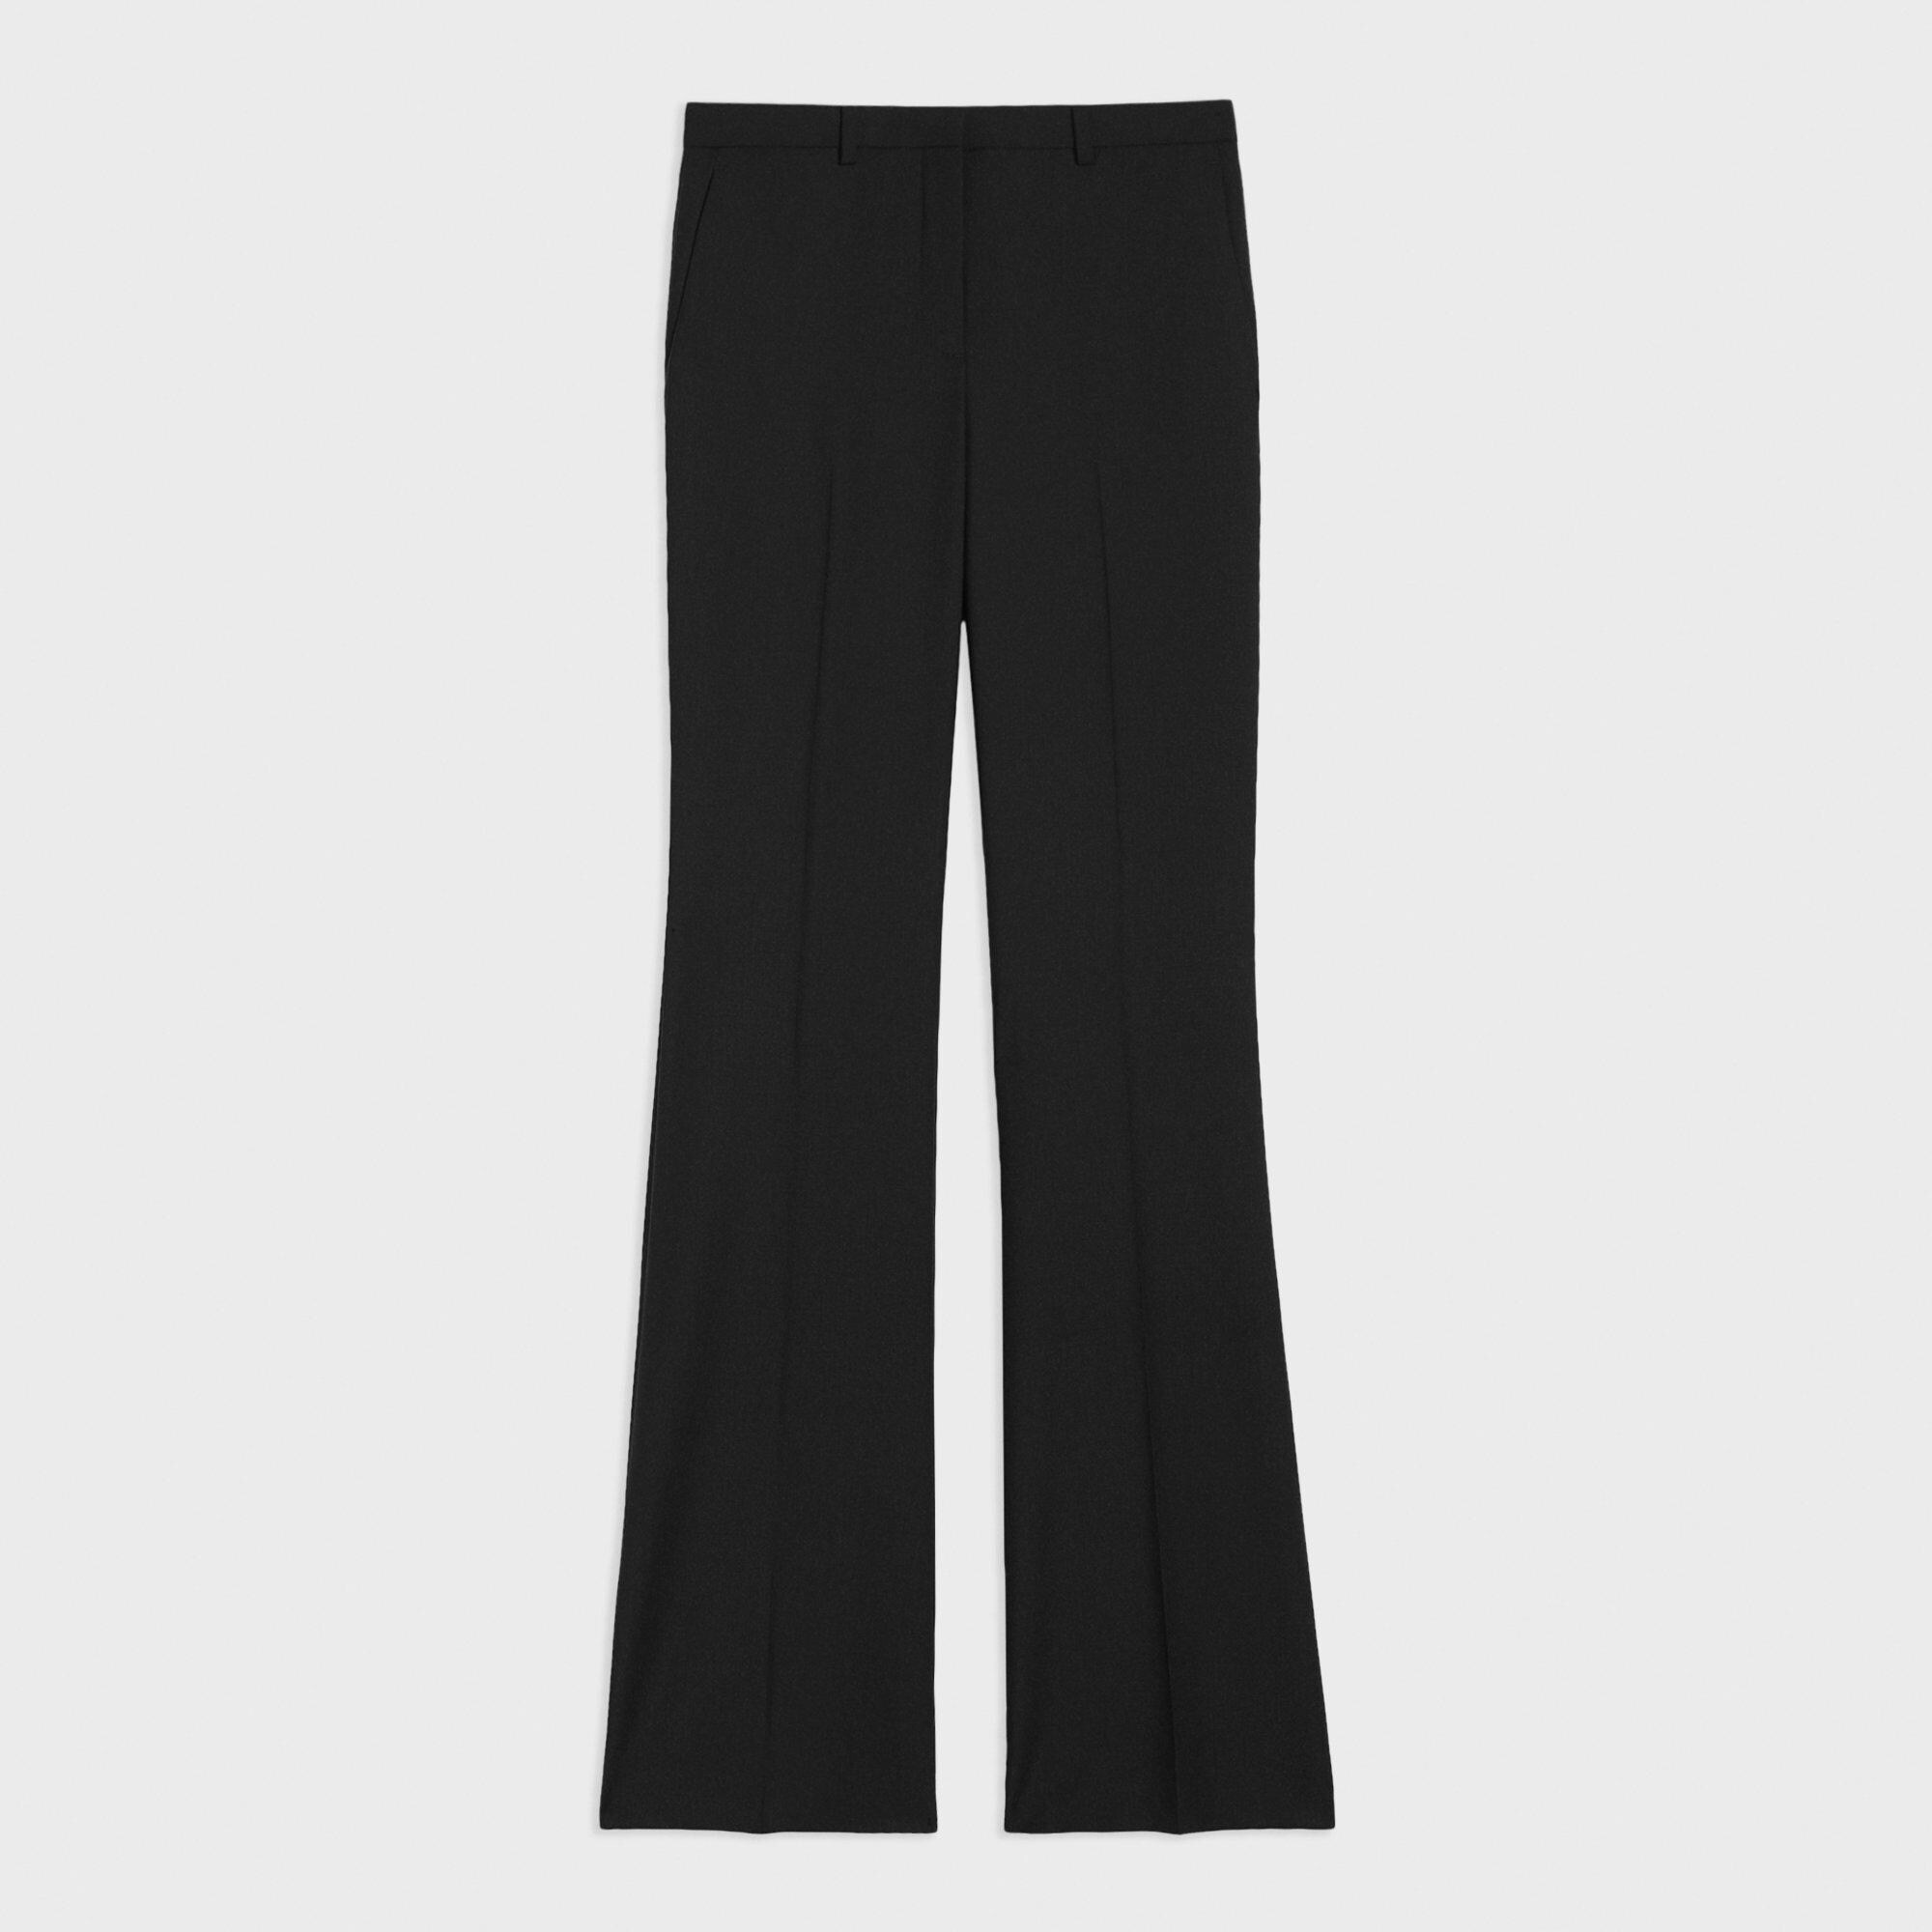 Theory Demitria 2 Pant in Pink Clay